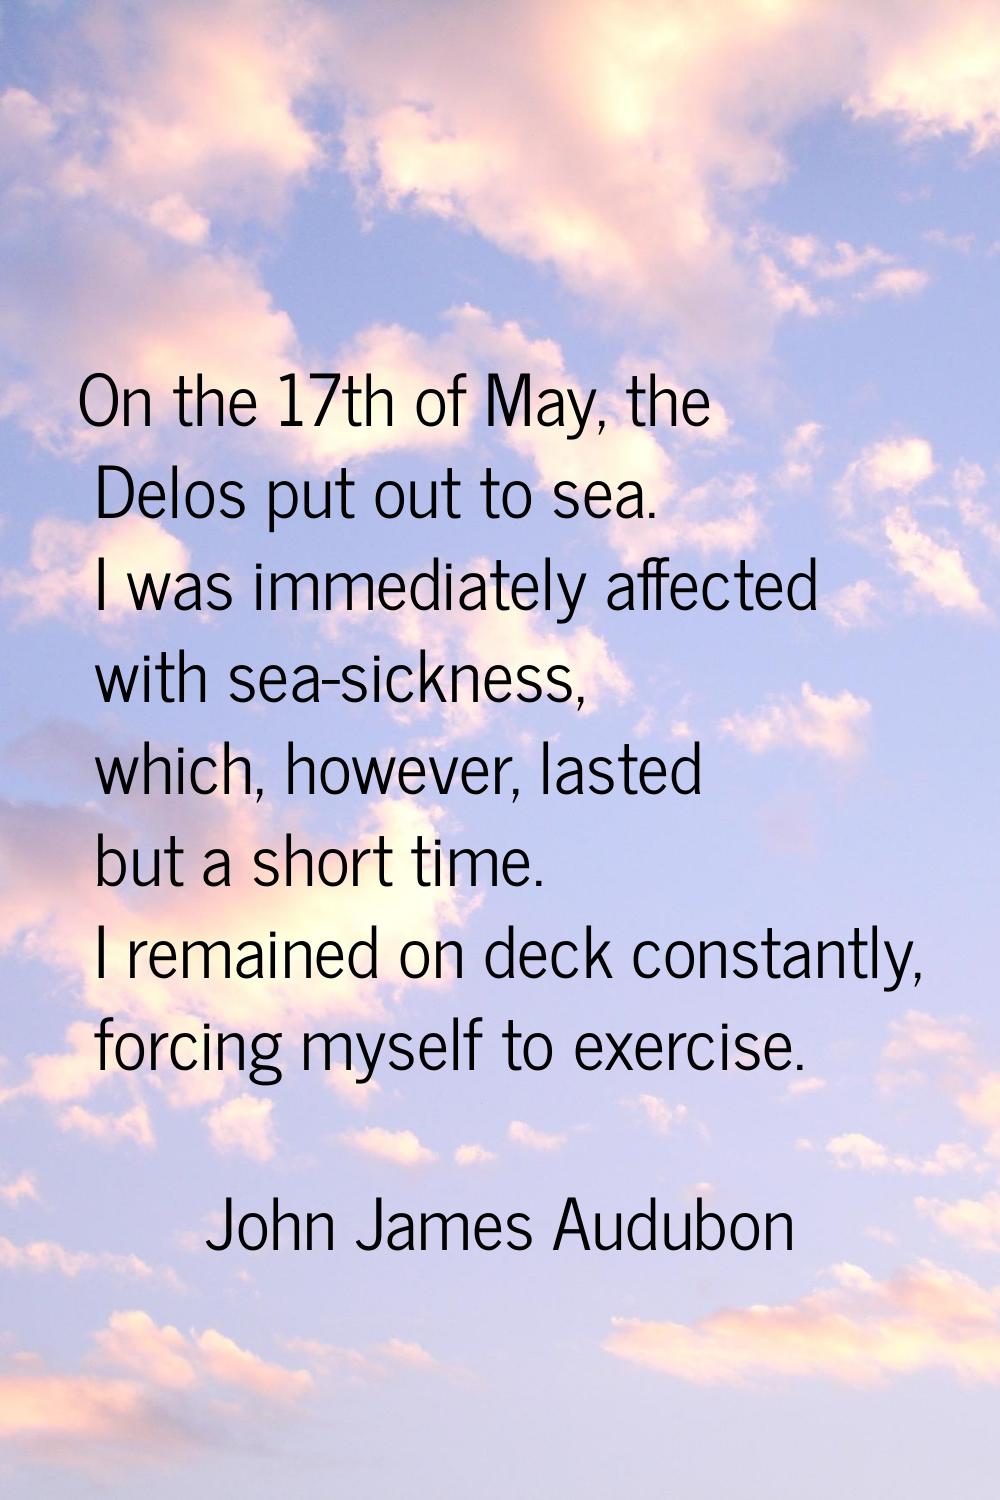 On the 17th of May, the Delos put out to sea. I was immediately affected with sea-sickness, which, 